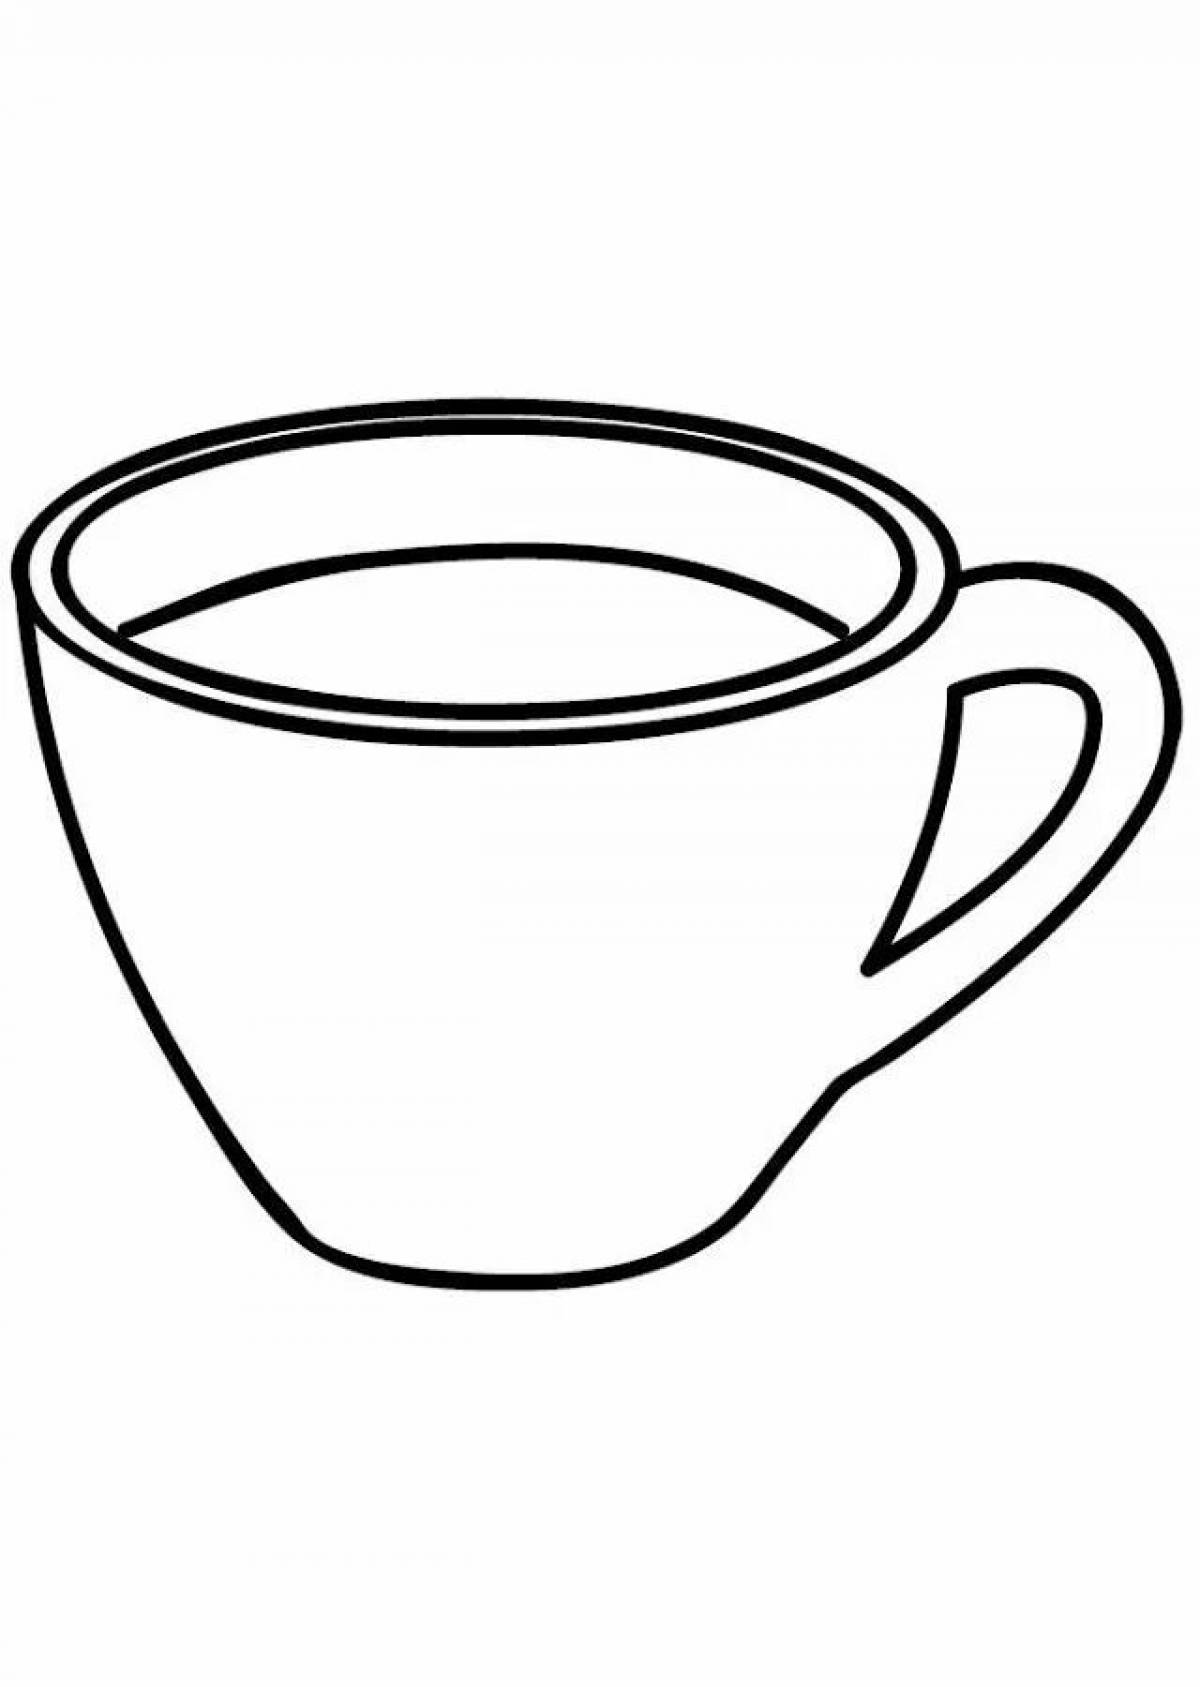 Coloring page stylish mugs and cups